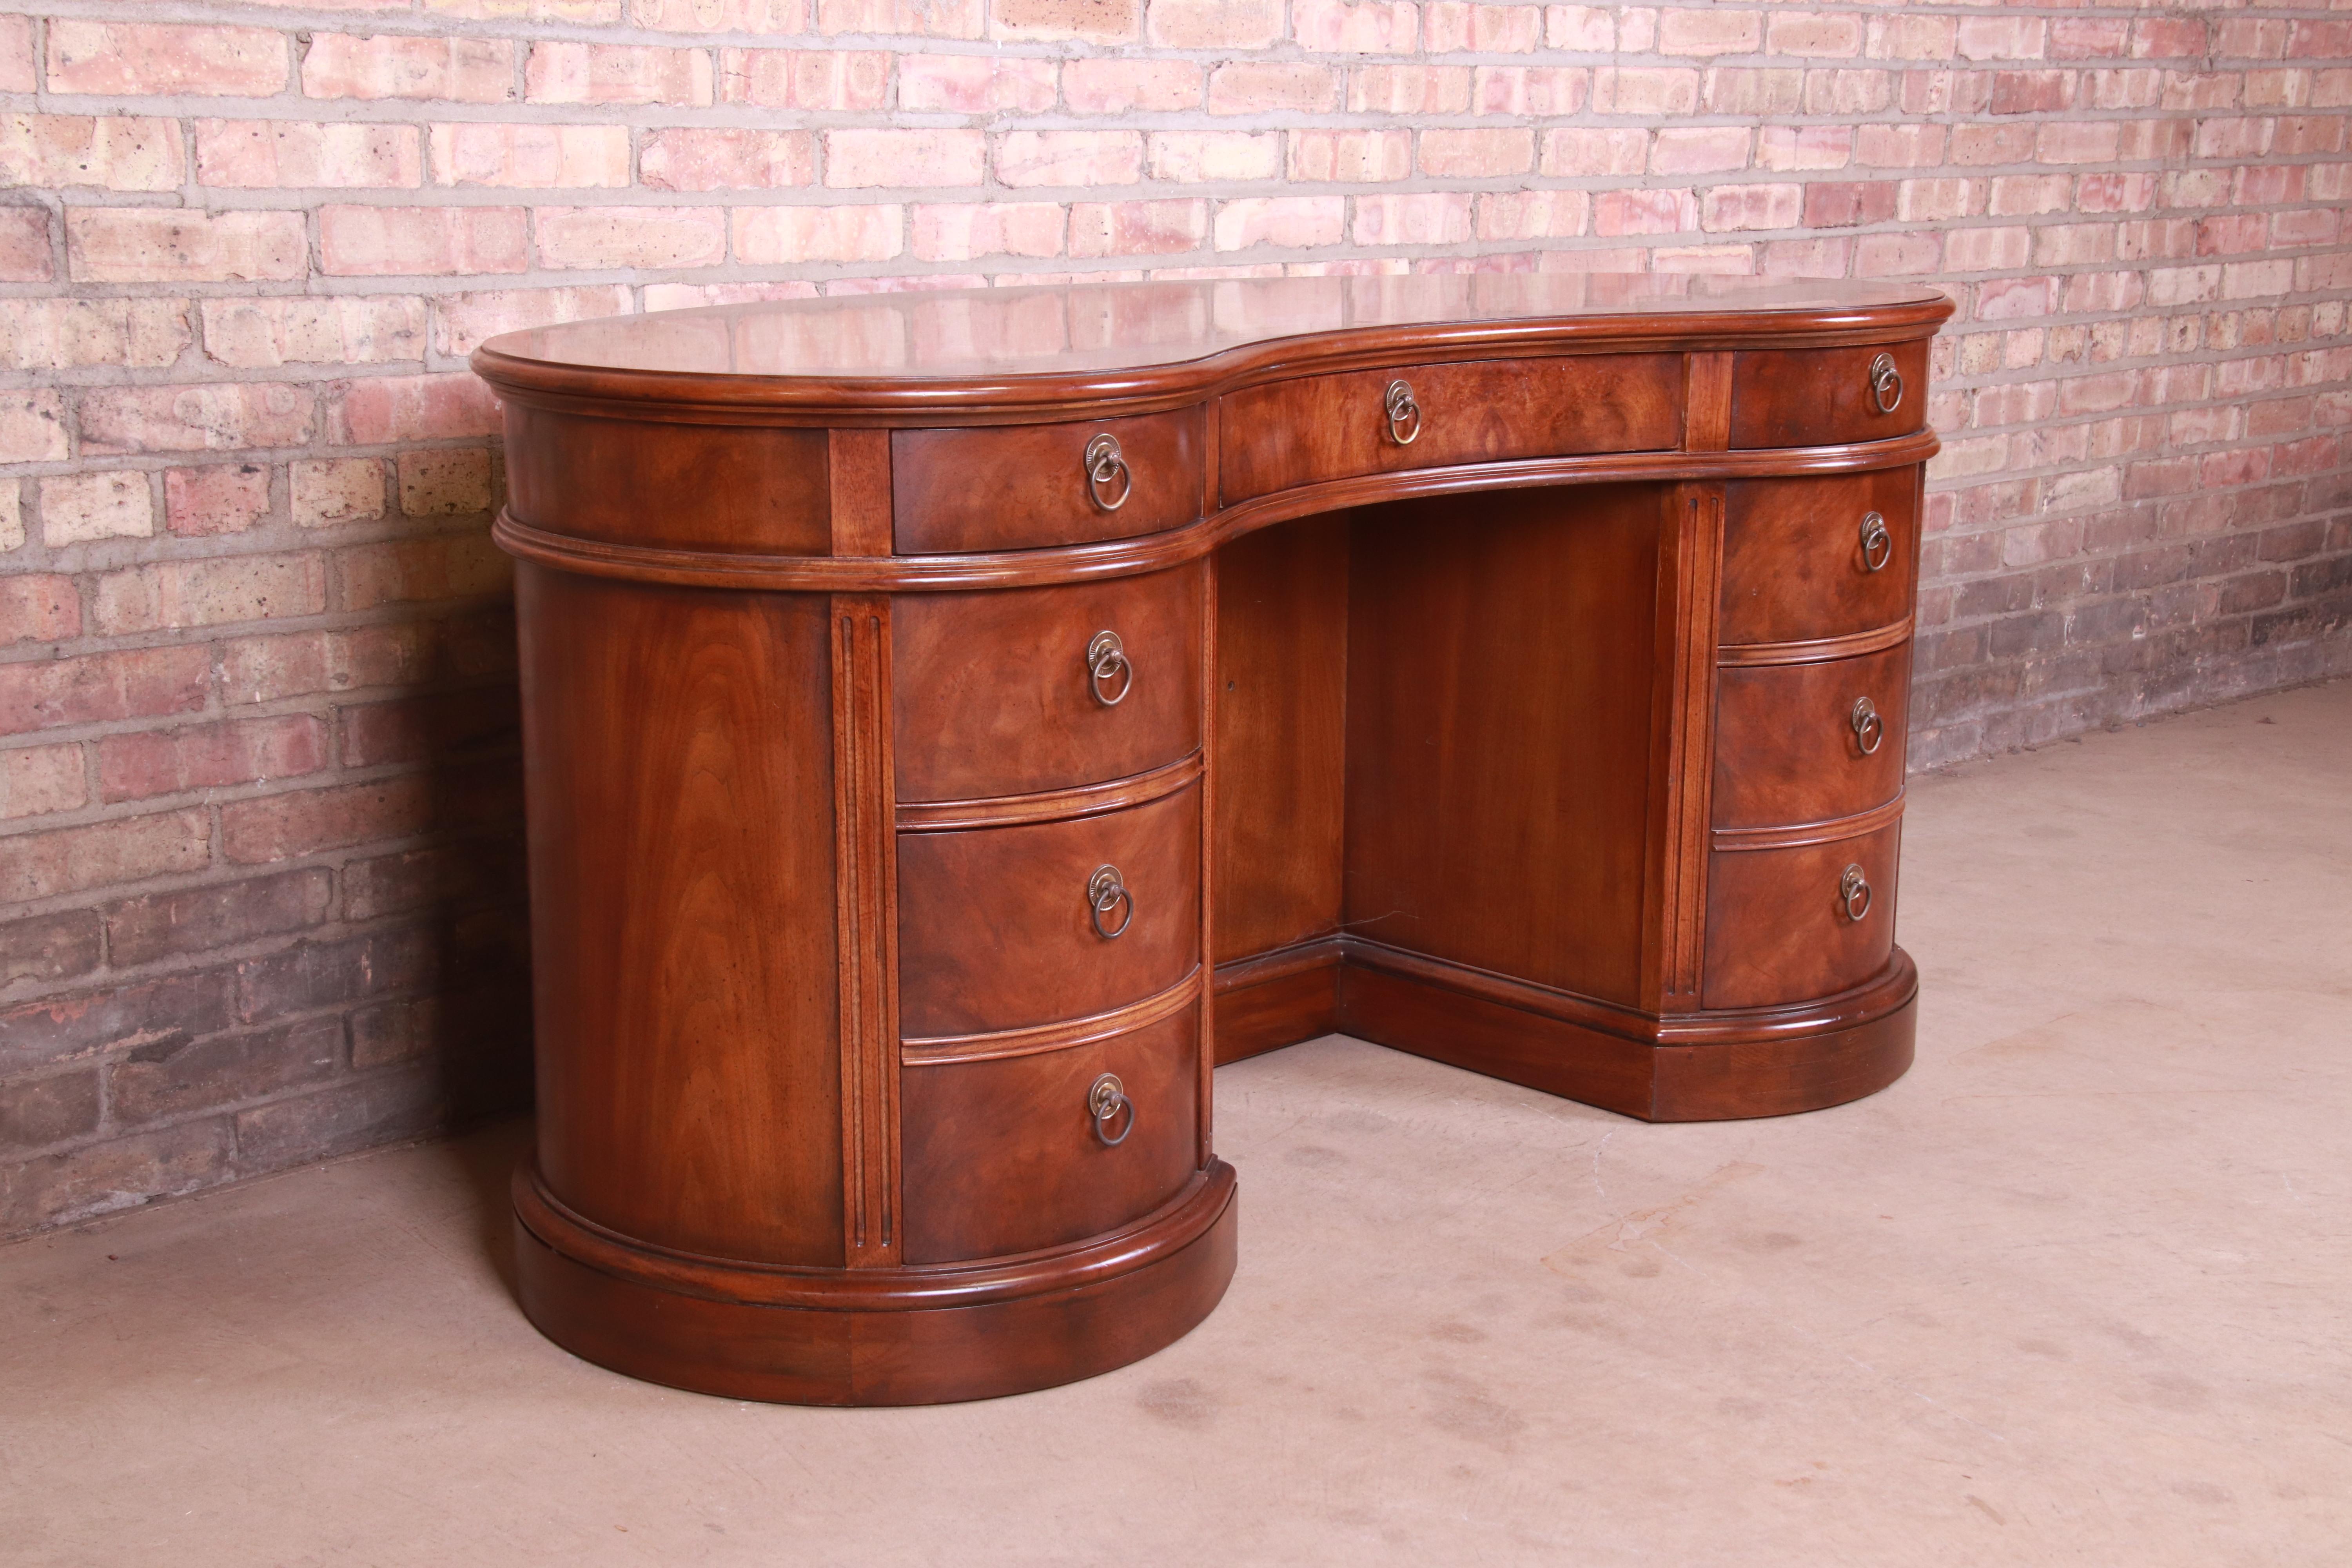 Regency Drexel Heritage Mahogany and Burl Wood Kidney Shaped Desk with Bookcase